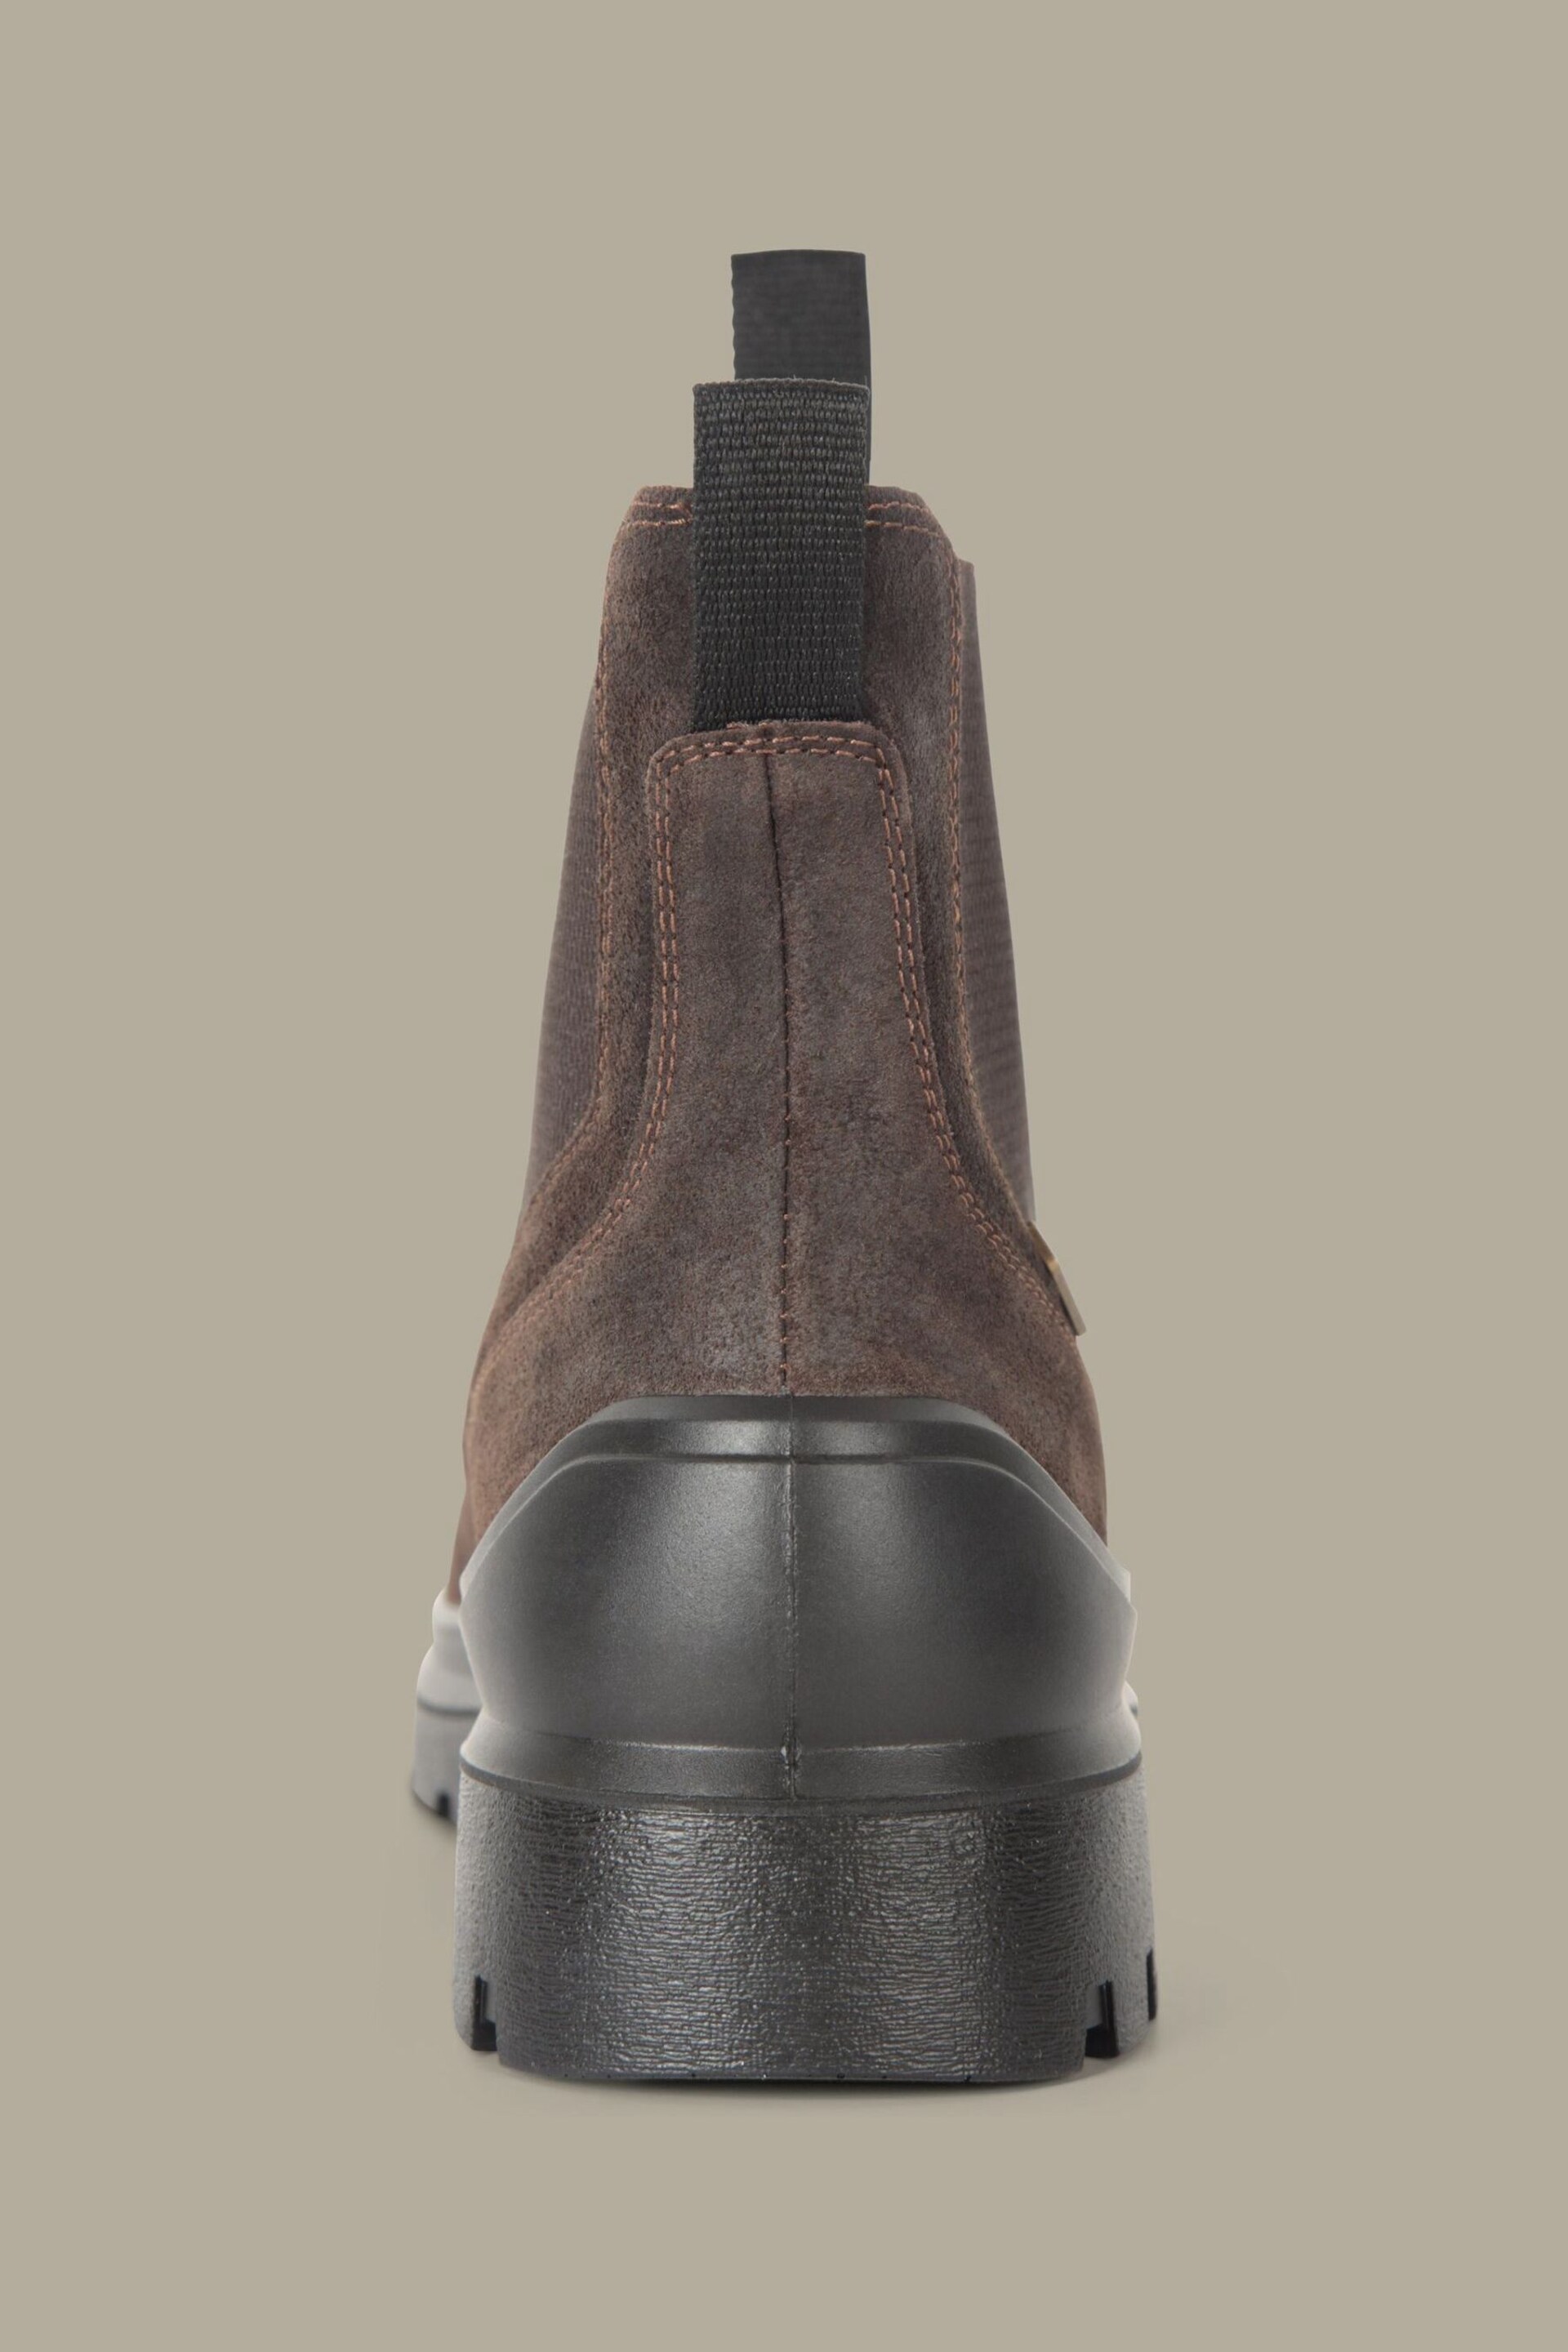 Mountain Warehouse Brown Salcombe Mens Waterproof Leather Chelsea Boots - Image 3 of 5